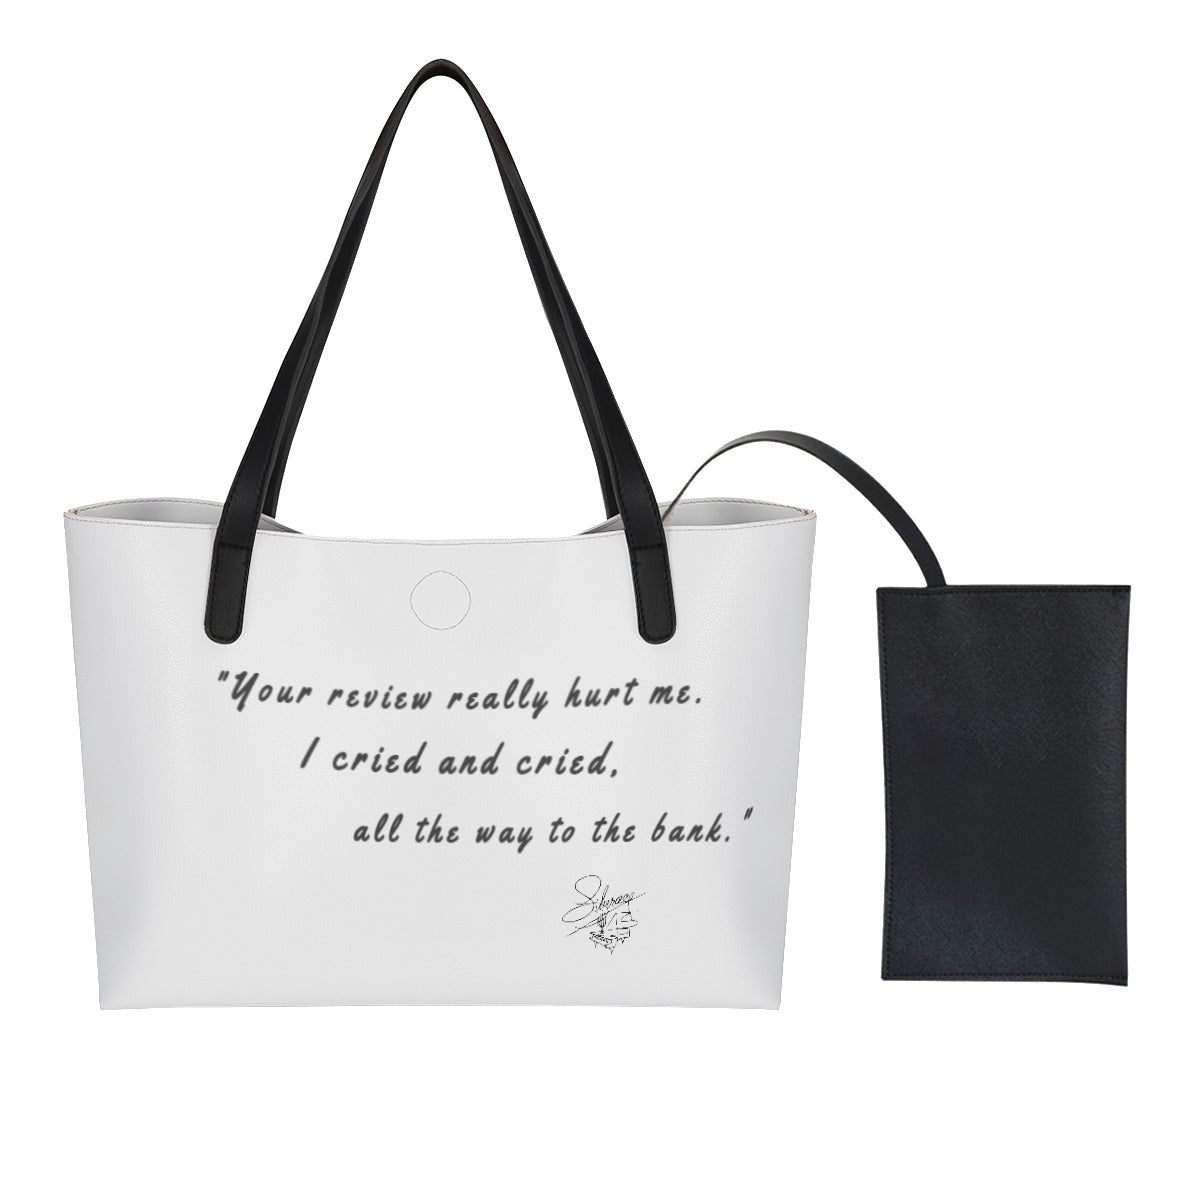 Liberace "I cried all the way to the bank" Shopping Tote Bag With Black Mini Purse